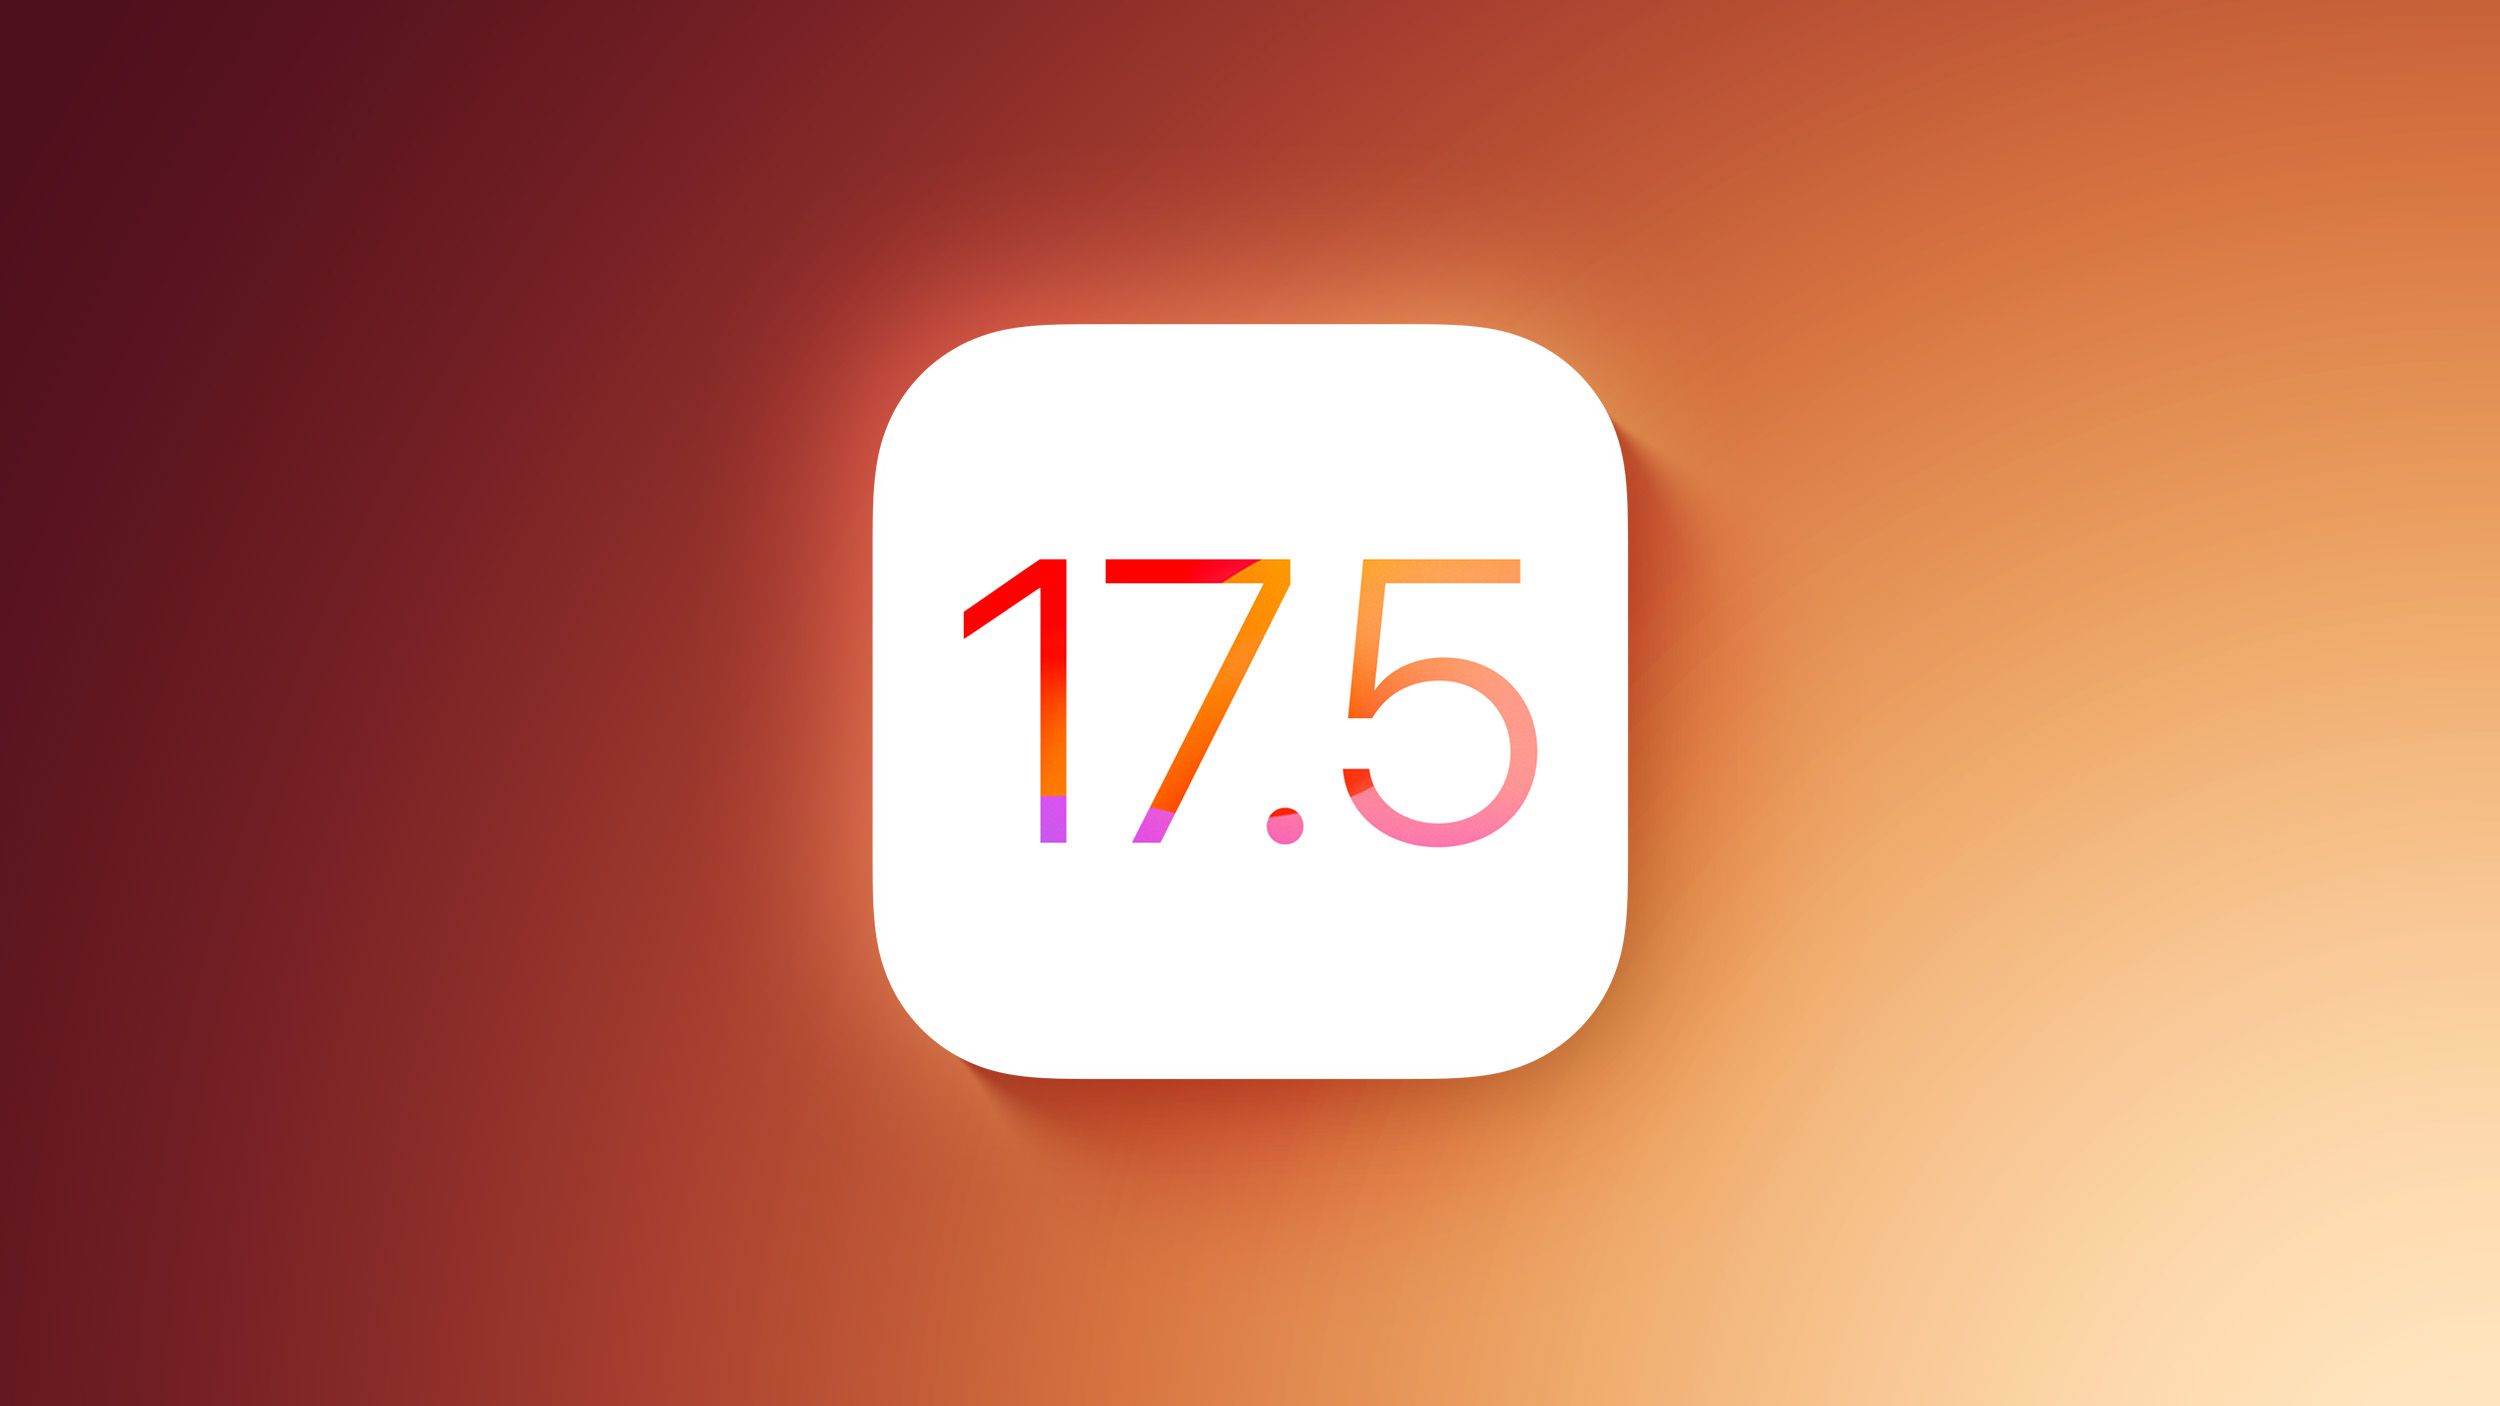 iOS 17.5 Features: What’s New in iOS 17.5